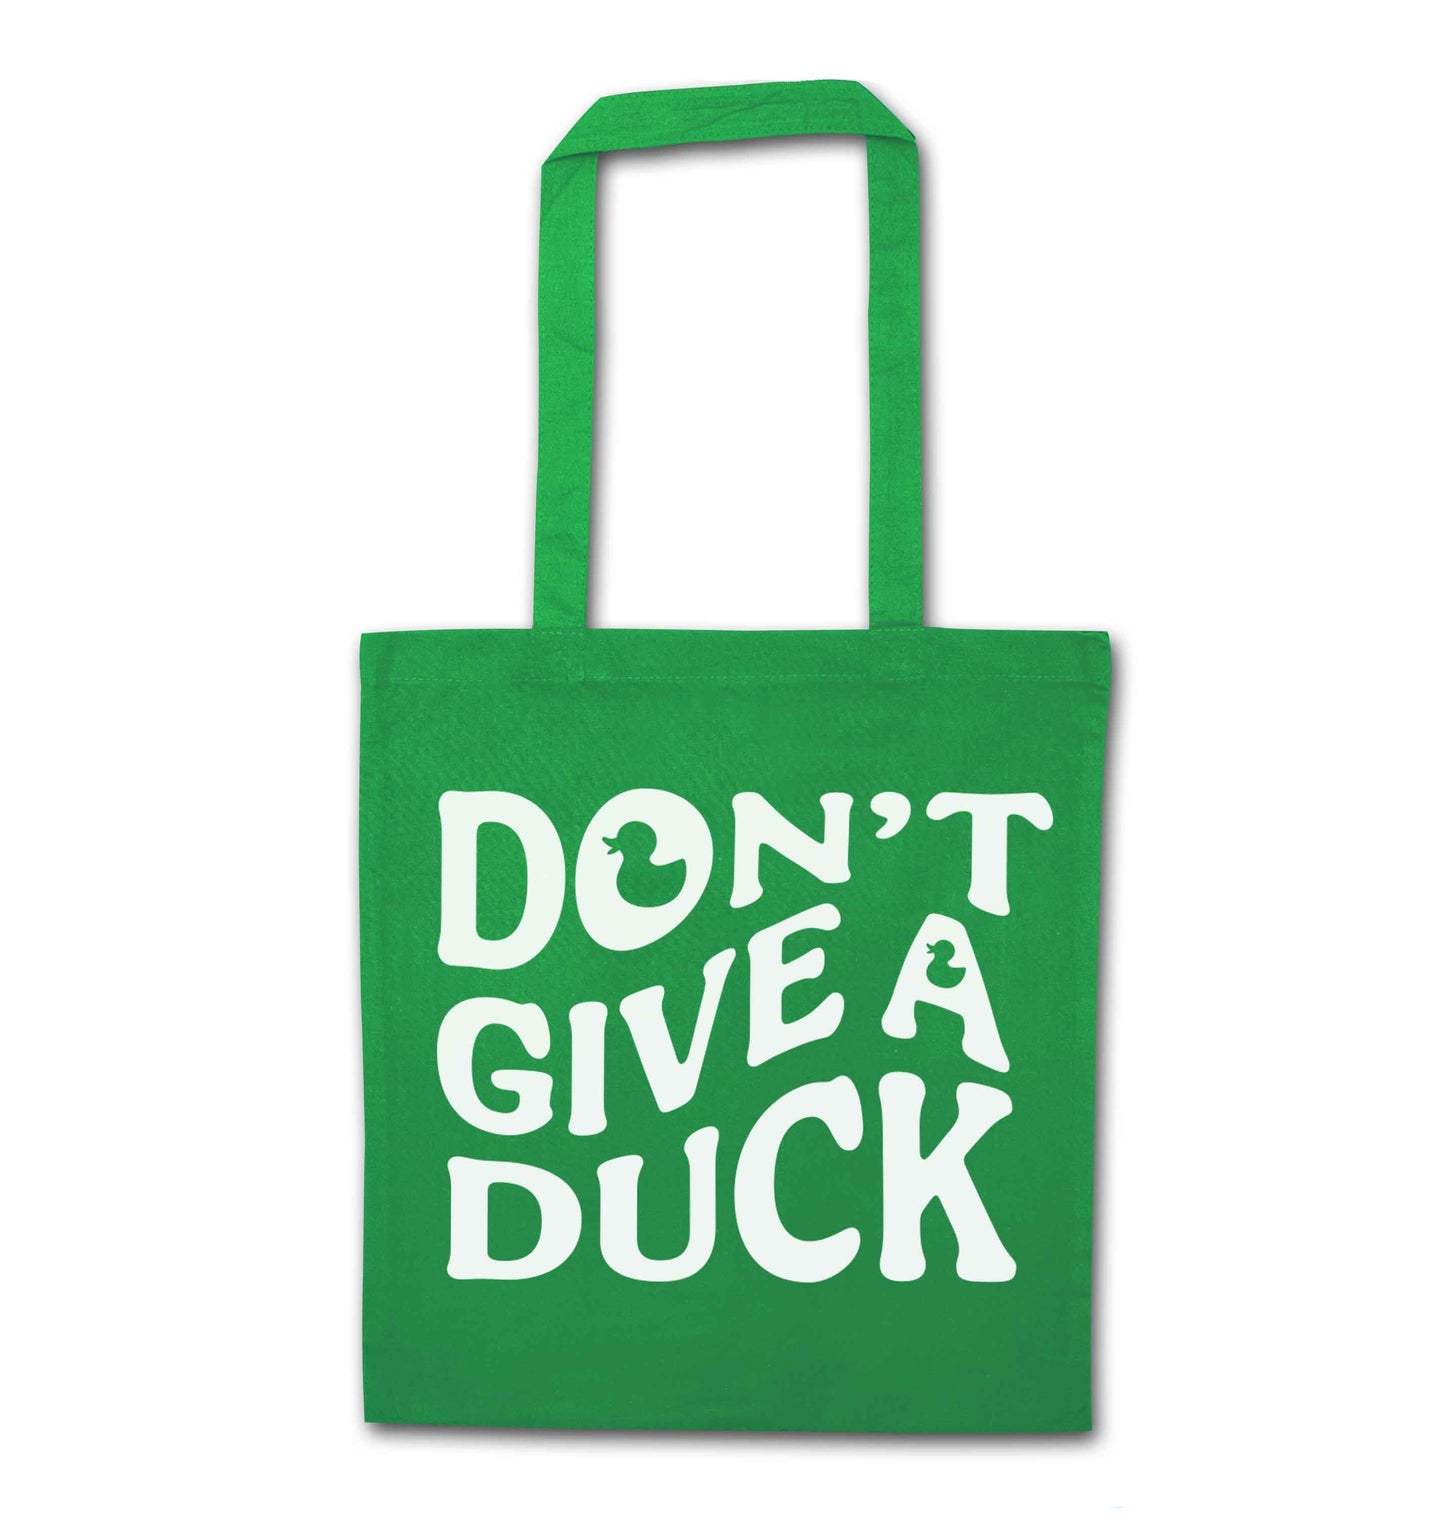 Don't give a duck green tote bag